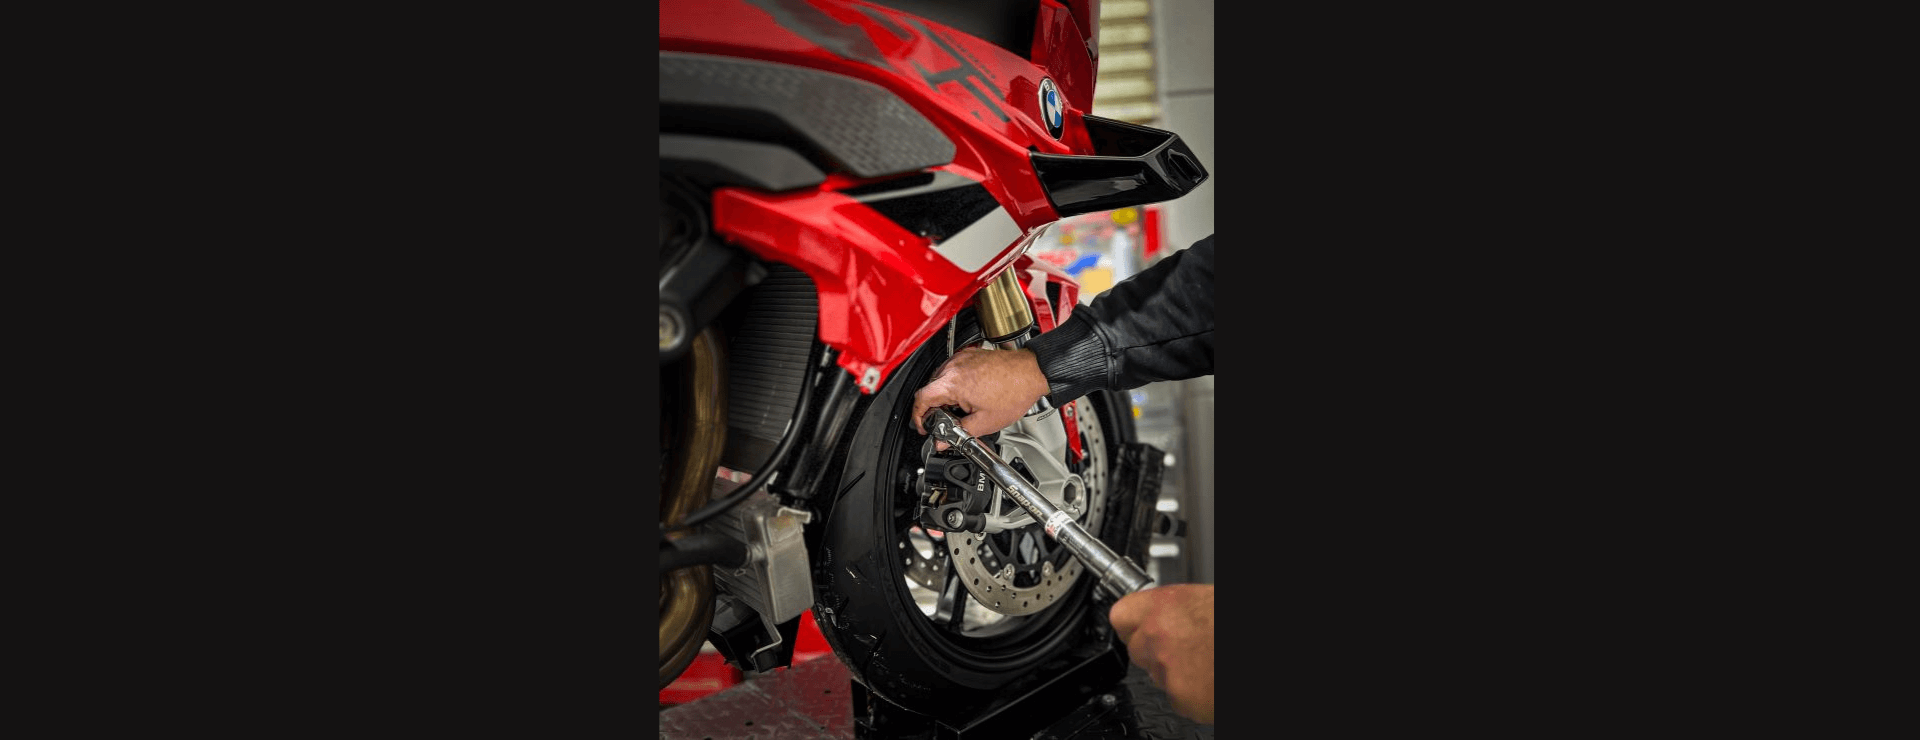 We offer motorcycle servicing for ALL makes and models.